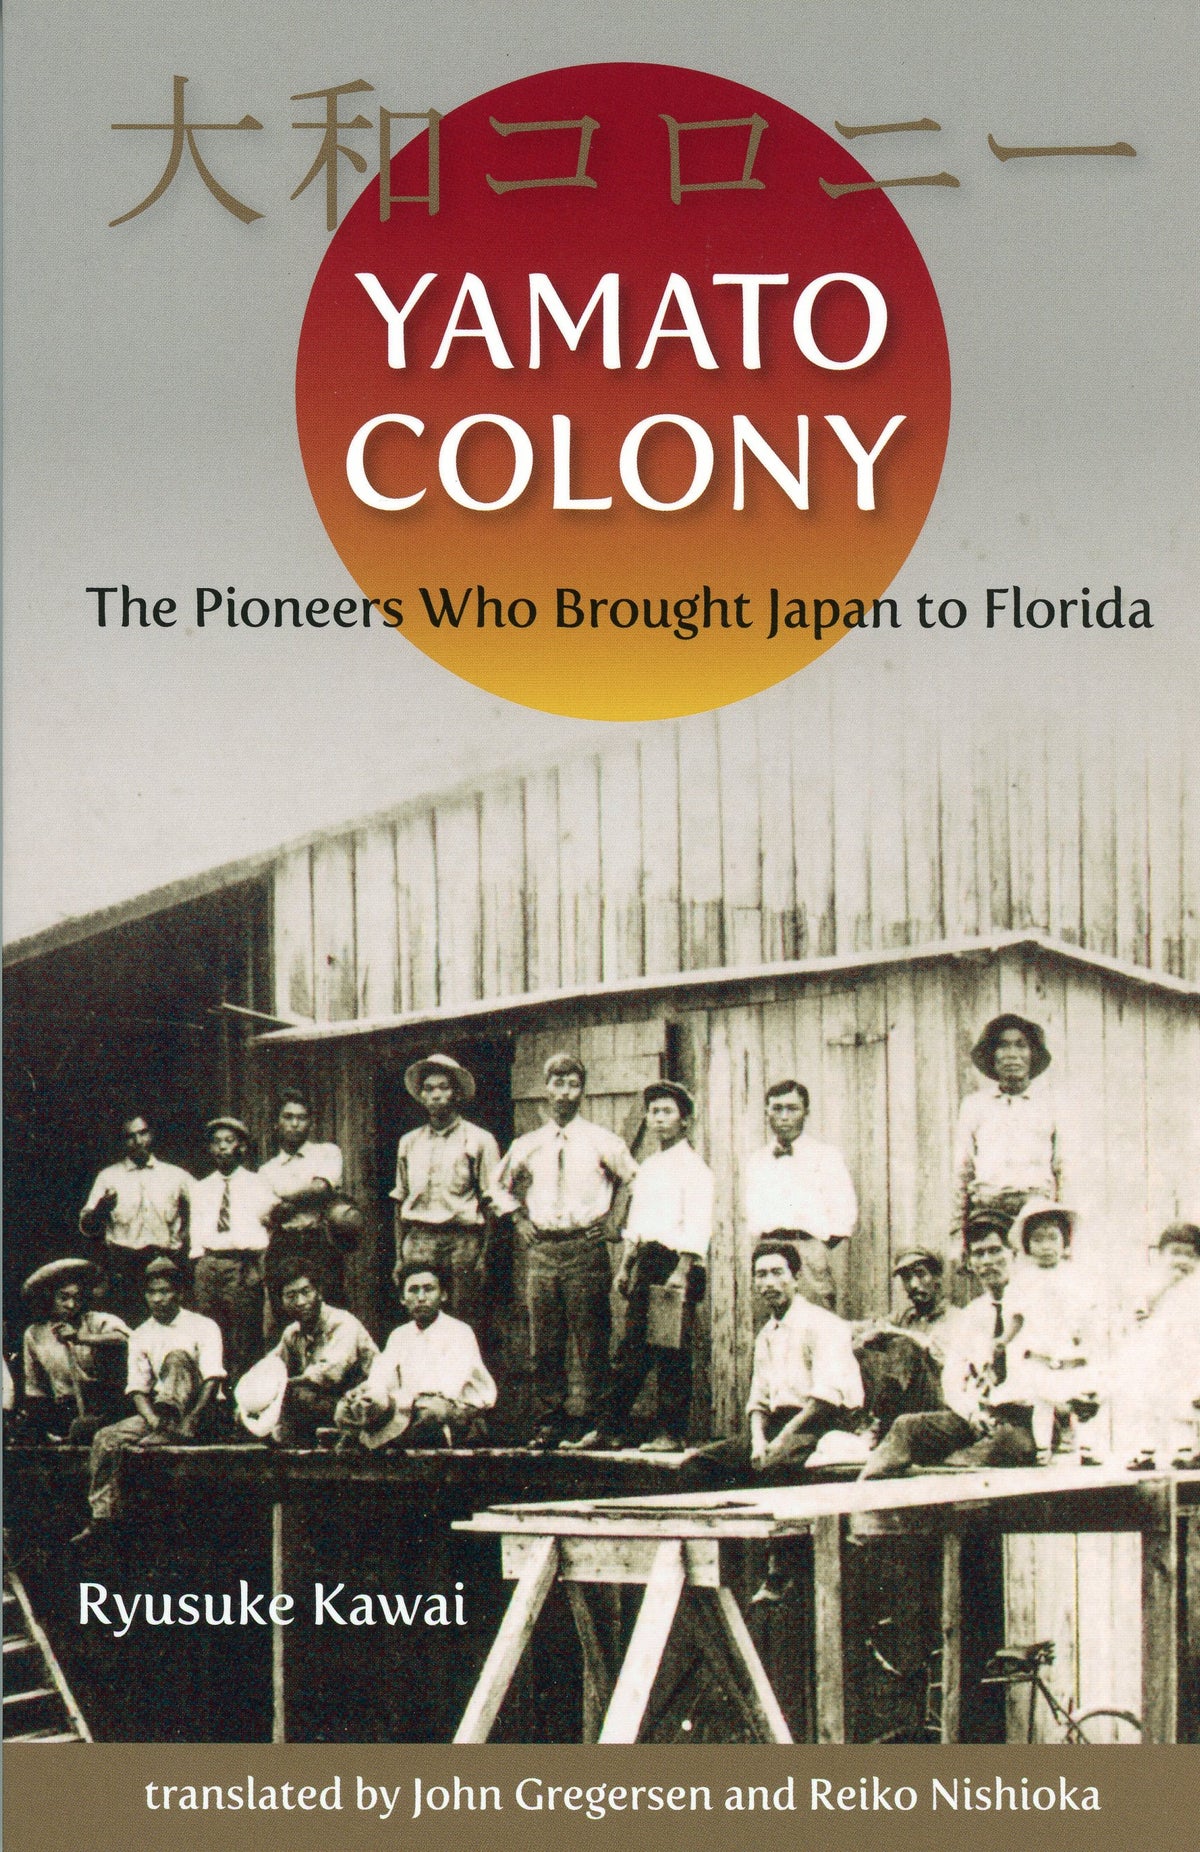 Yamato Colony: The Pioneers Who Brought Japan to Florida